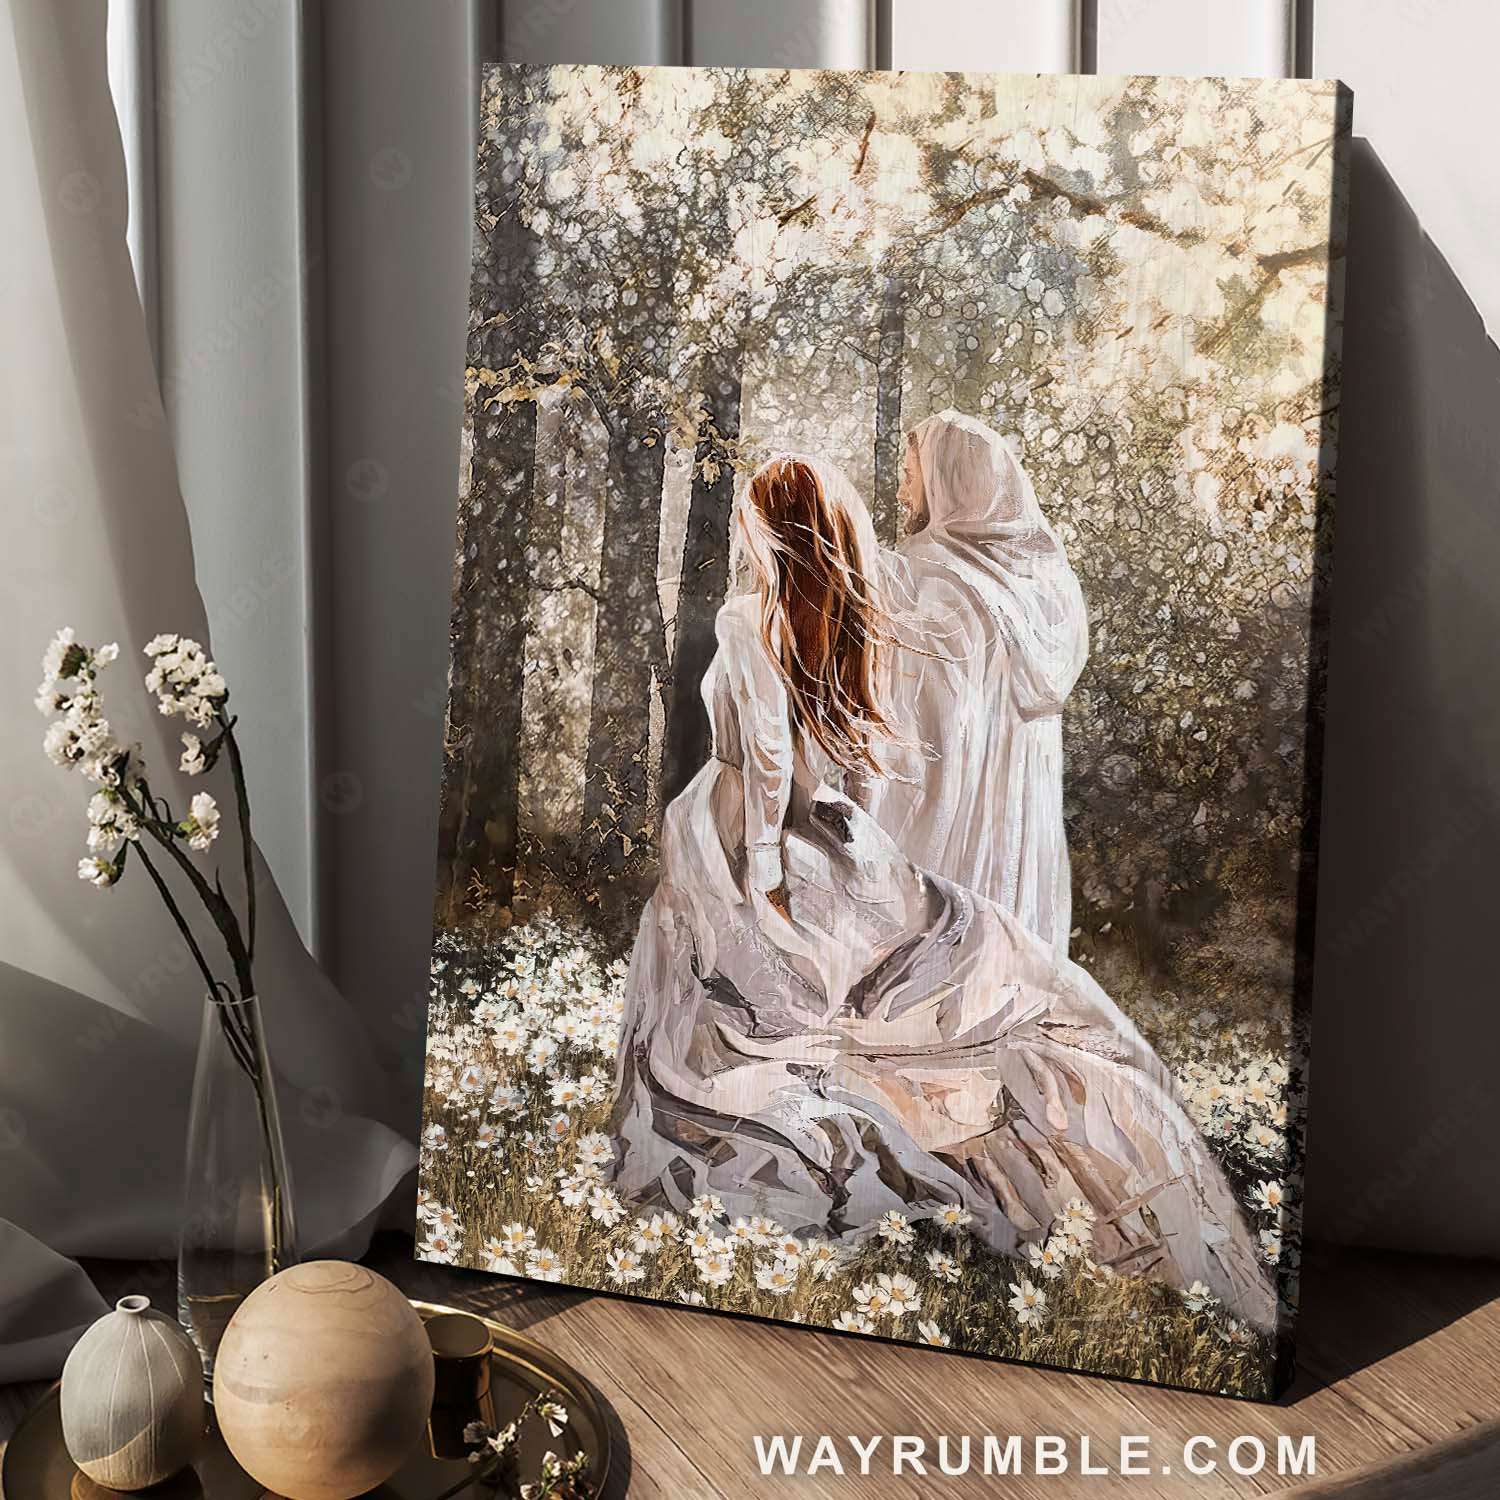 Walking with Jesus, Beautiful girl painting, In the forest, Among the flower field - Jesus Portrait Canvas Prints, Christian Wall Art